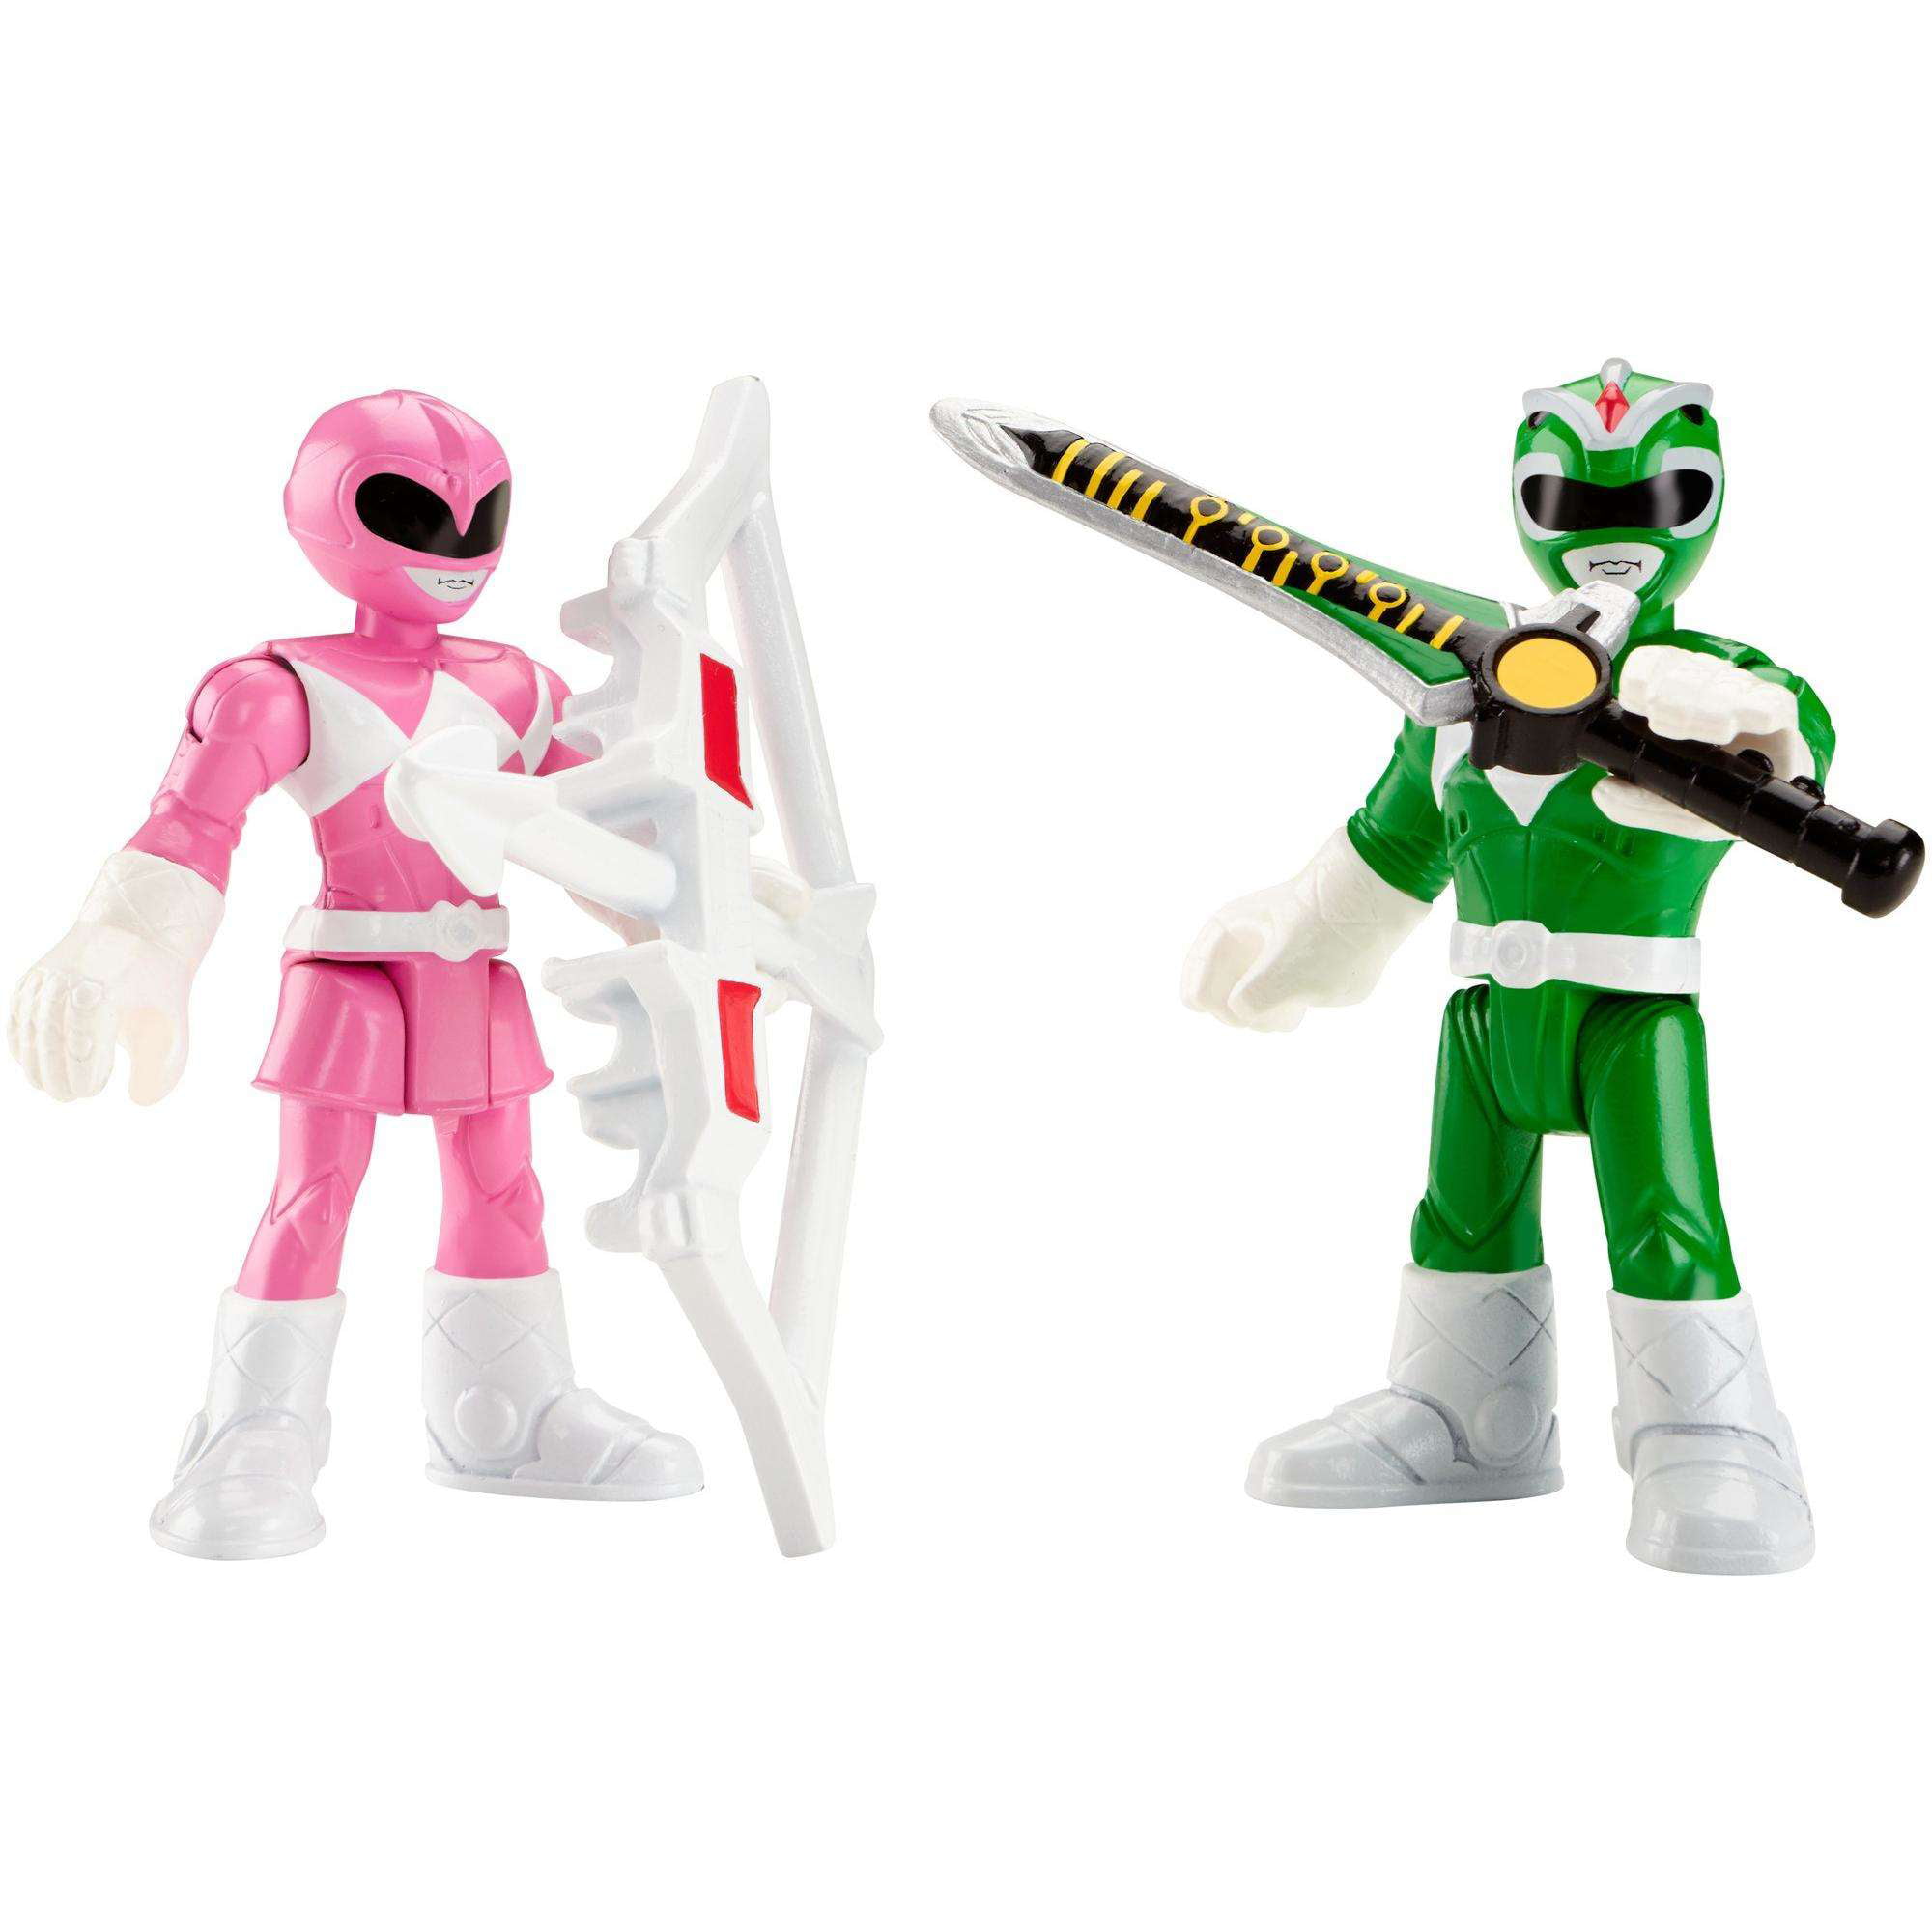 Details about   Fisher Price Imaginext Power Rangers Pink RANGER figure Super Friends Toys Dc 